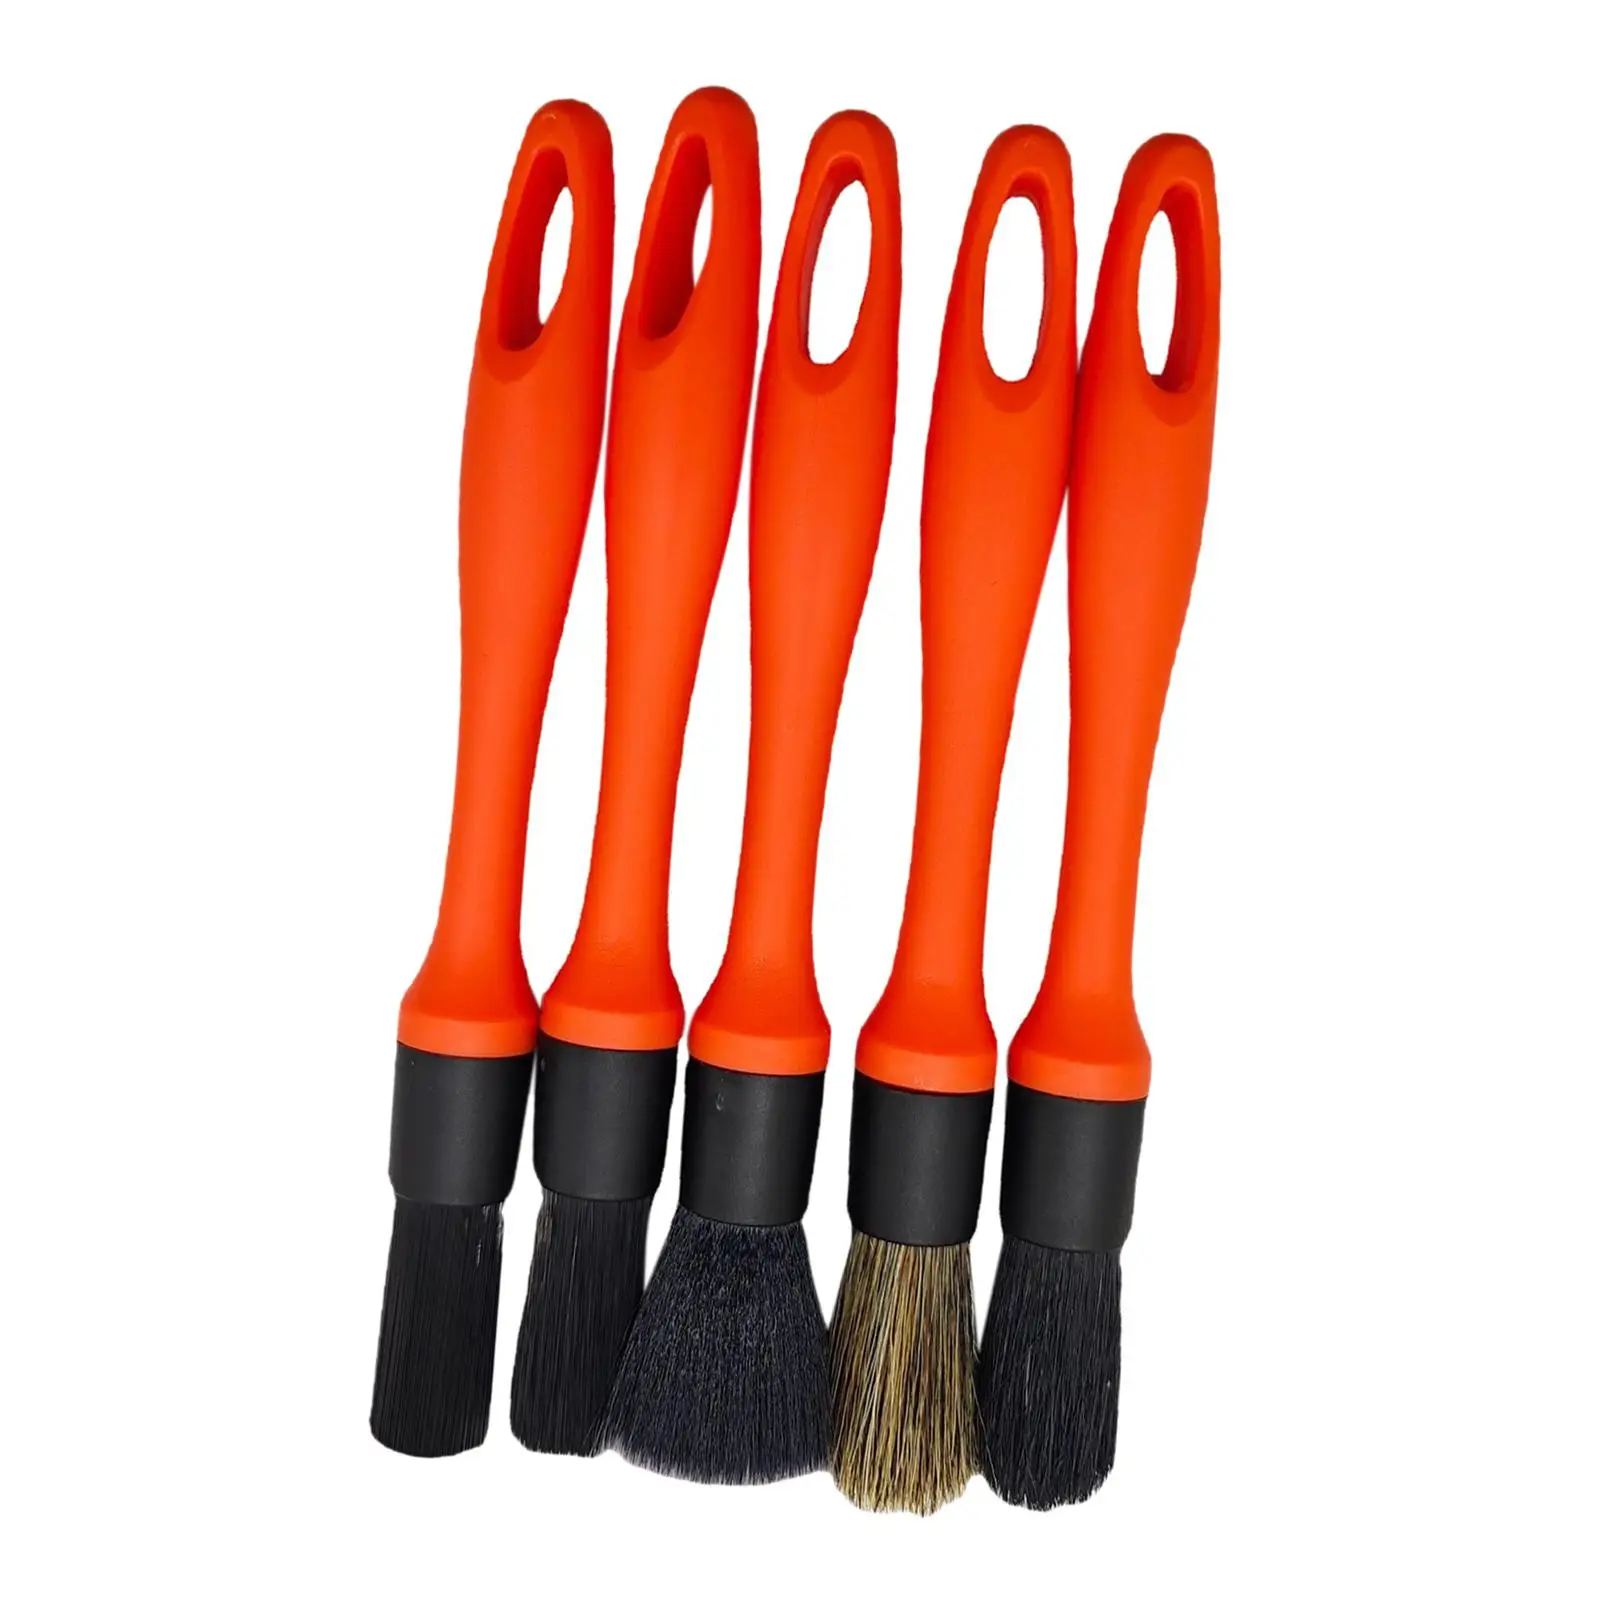 5Pcs Car Detailing Brush Tool Interior Car Cleaning Detail Dust Brush for Air Conditioner Truck Console Air Outlet Exterior